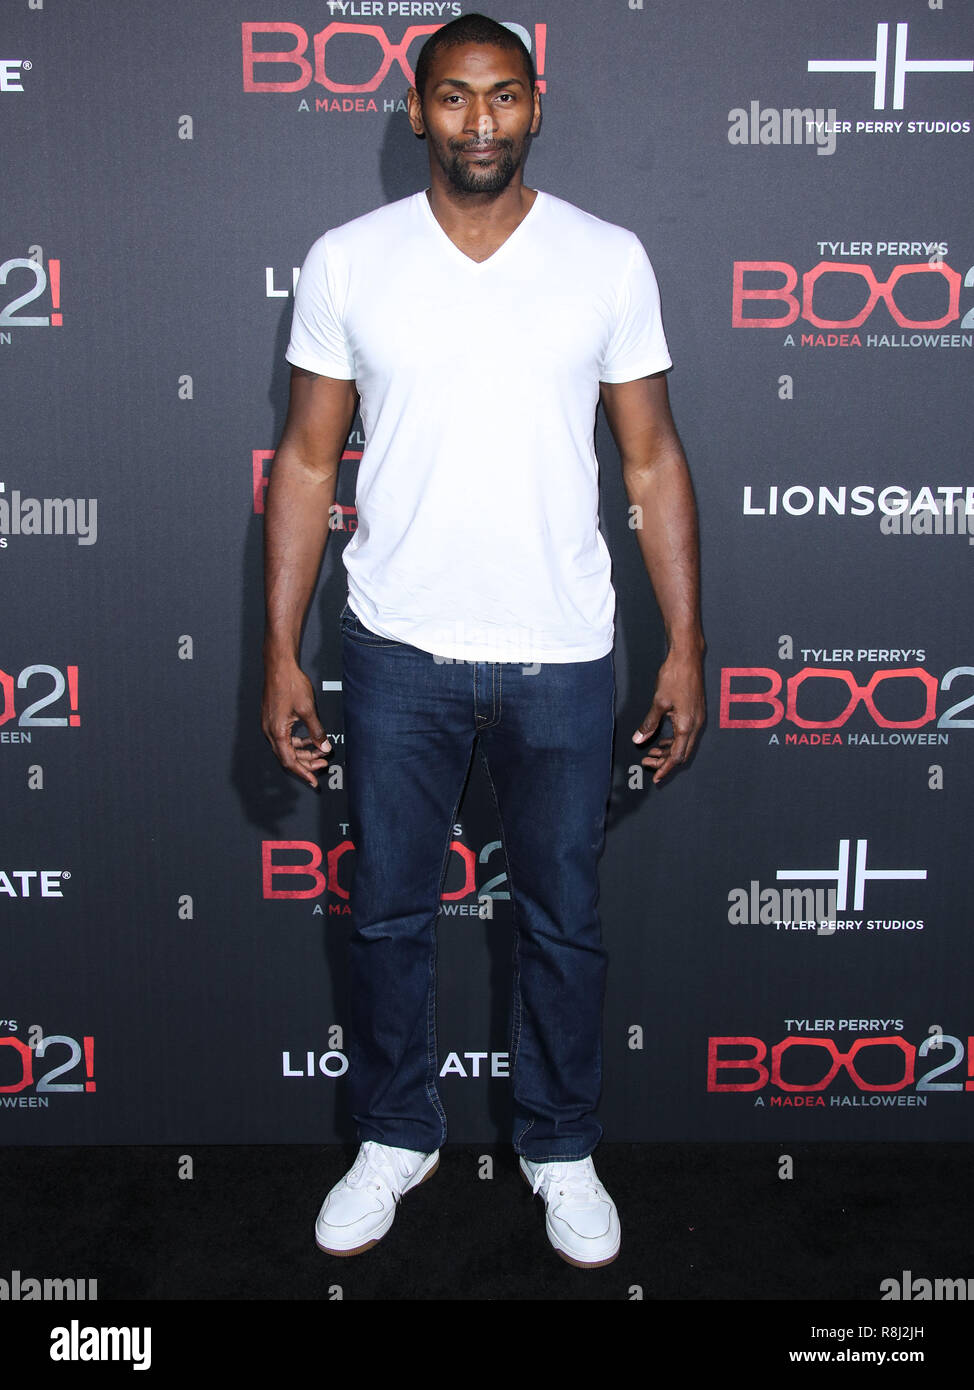 LOS ANGELES, CA, USA - OCTOBER 16: Metta World Peace, Ronald William Artest, Jr. at the Los Angeles Premiere Of Lionsgate's 'Tyler Perry's Boo 2! A Madea Halloween' held at Regal Cinema L.A. Live Stadium 14 on October 16, 2017 in Los Angeles, California, United States. (Photo by Xavier Collin/Image Press Agency) Stock Photo